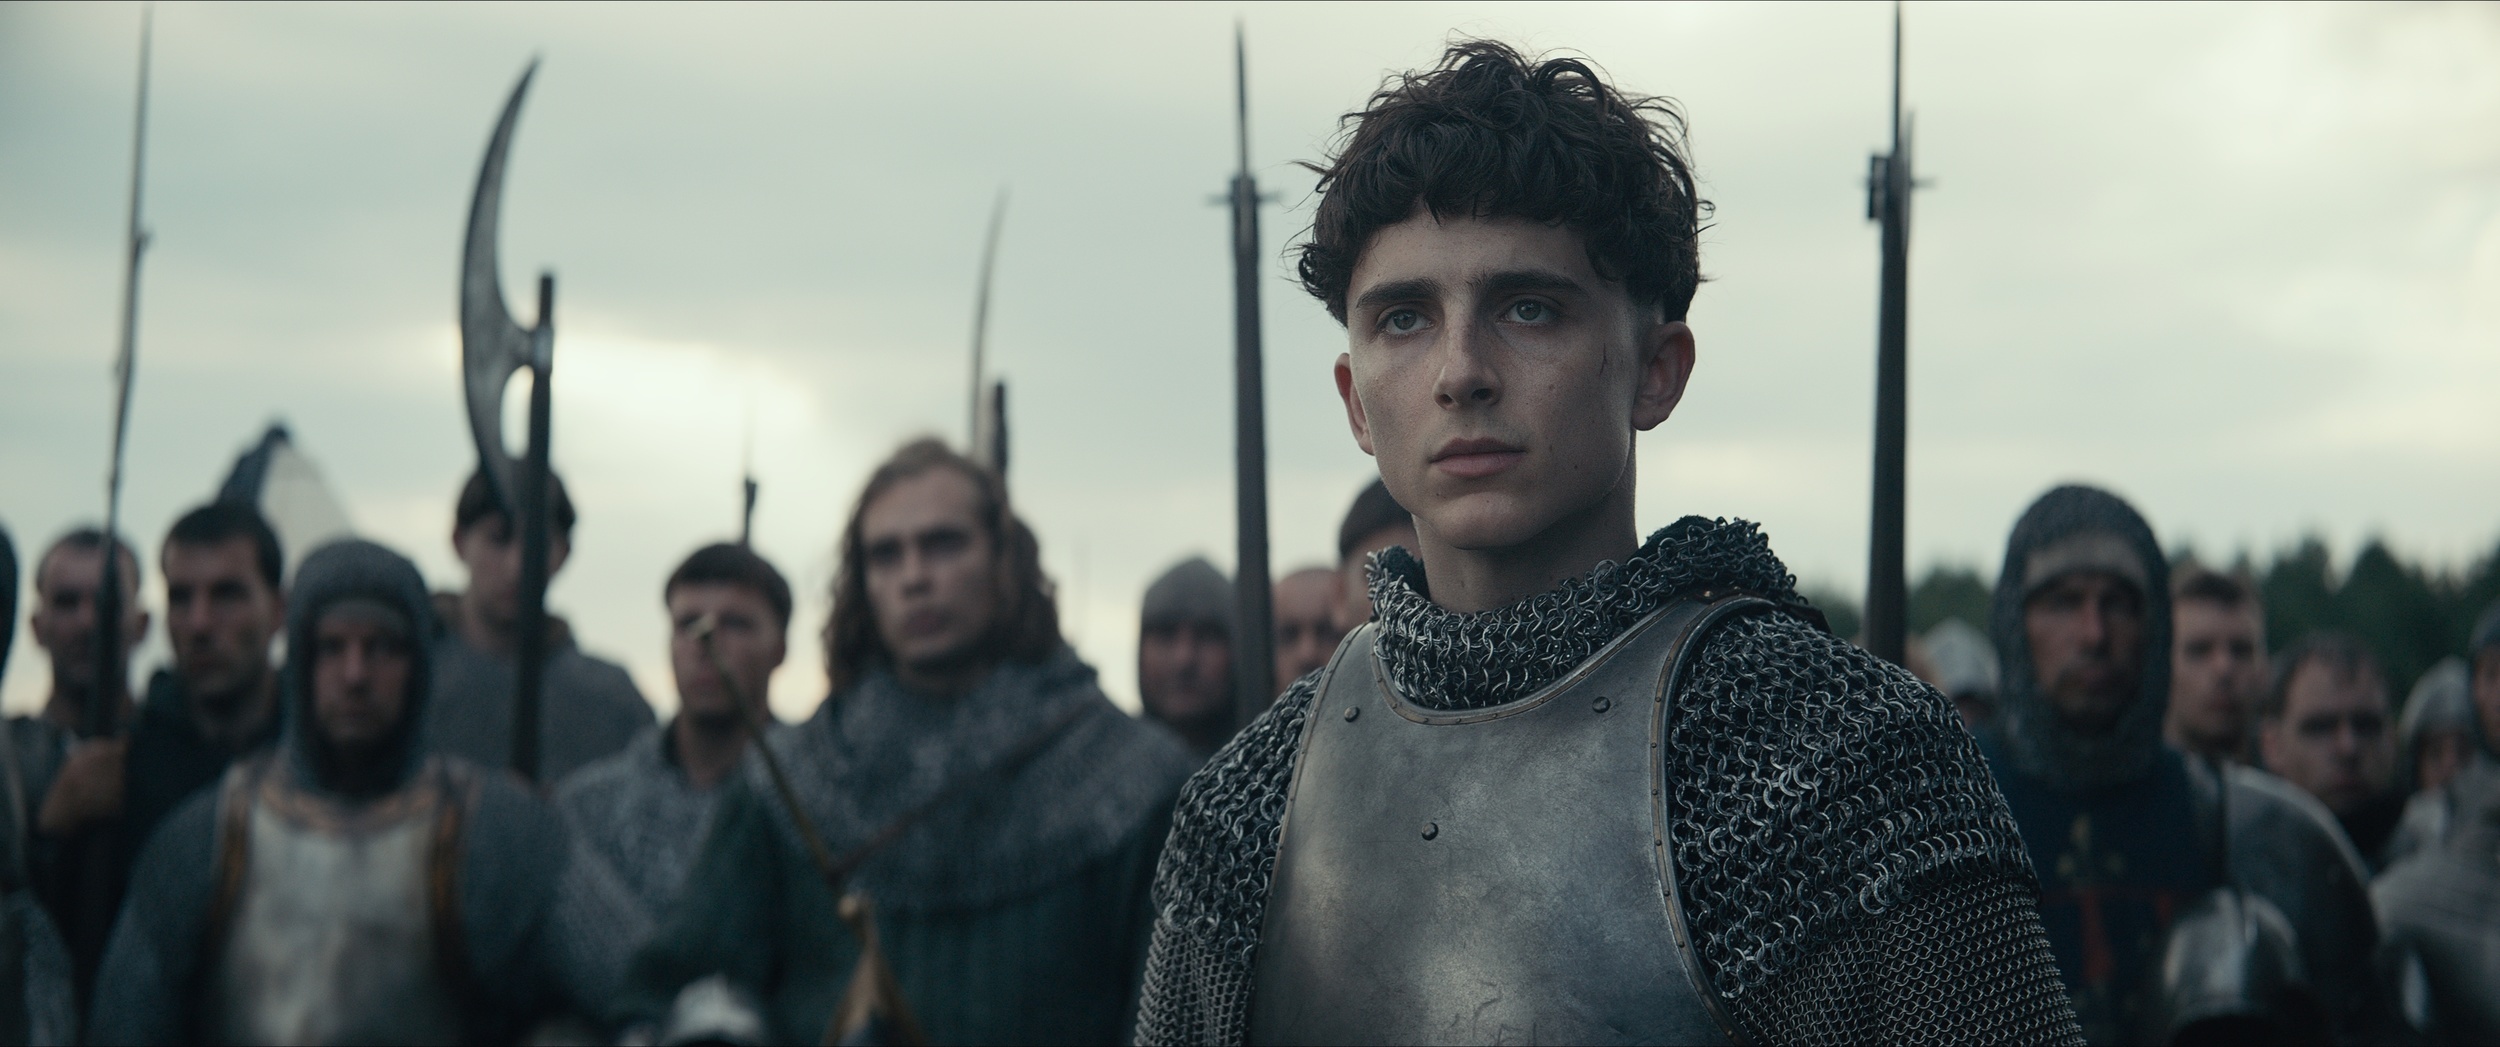 <p>We started with <em>The Queen</em>, and we end with <em>The King</em>. The movie is based on a few of Shakespeare’s historical plays and stars Timothee Chalamet as Henry V just as his star rose. He has a wild haircut in this movie and is not the only one. The Netflix movie is not entirely successful, but it has quite the cast and some pieces that really work.</p><p><a href='https://www.msn.com/en-us/community/channel/vid-cj9pqbr0vn9in2b6ddcd8sfgpfq6x6utp44fssrv6mc2gtybw0us'>Did you enjoy this slideshow? Follow us on MSN to see more of our exclusive entertainment content.</a></p>